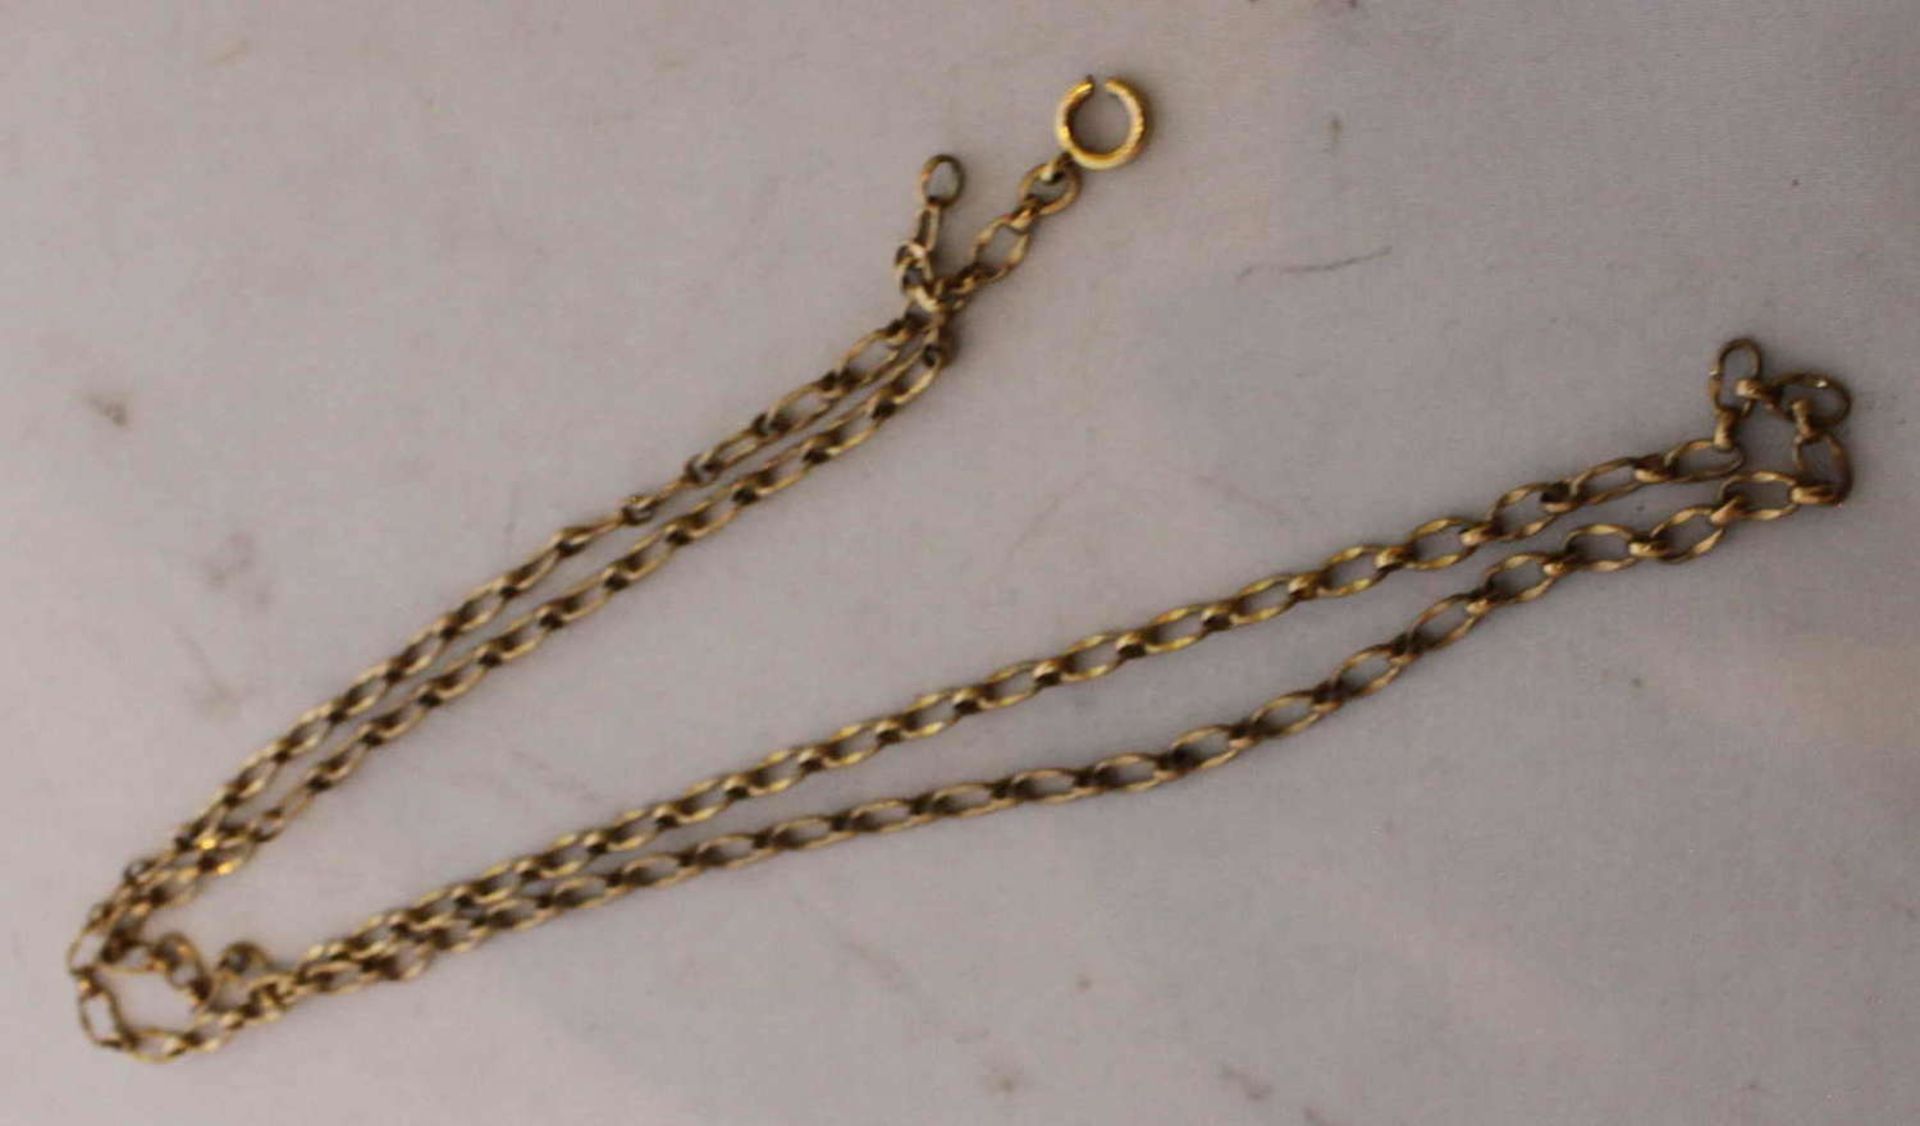 Necklace, 333 yellow gold, length approx. 70 cm. Closure defective. Weight approx. 12.2 gr.